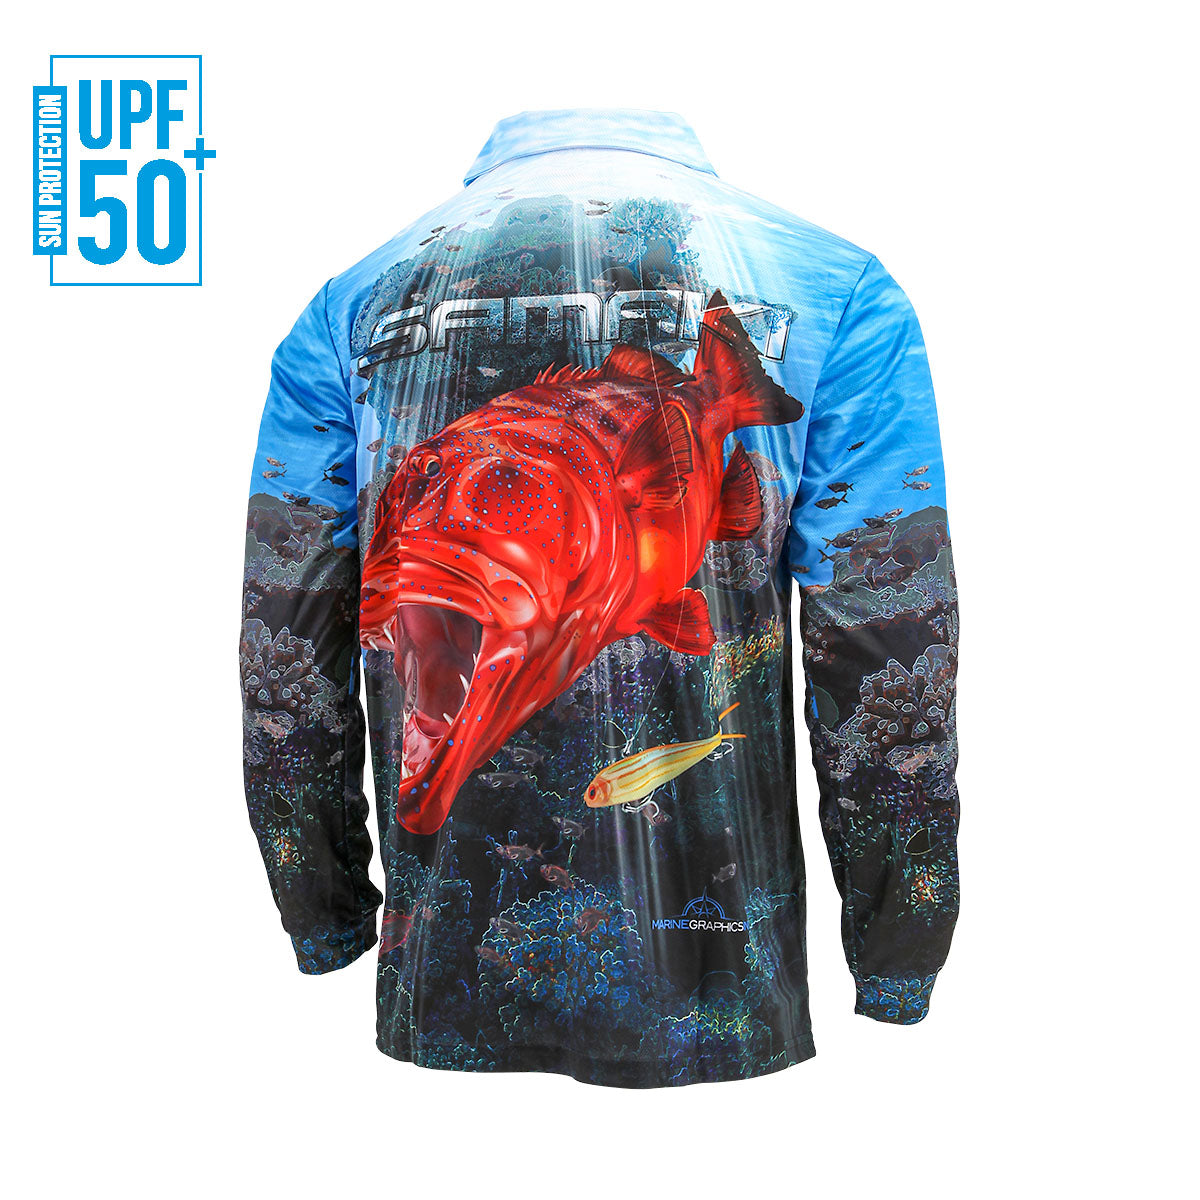 Coral Trout Fishing Jersey